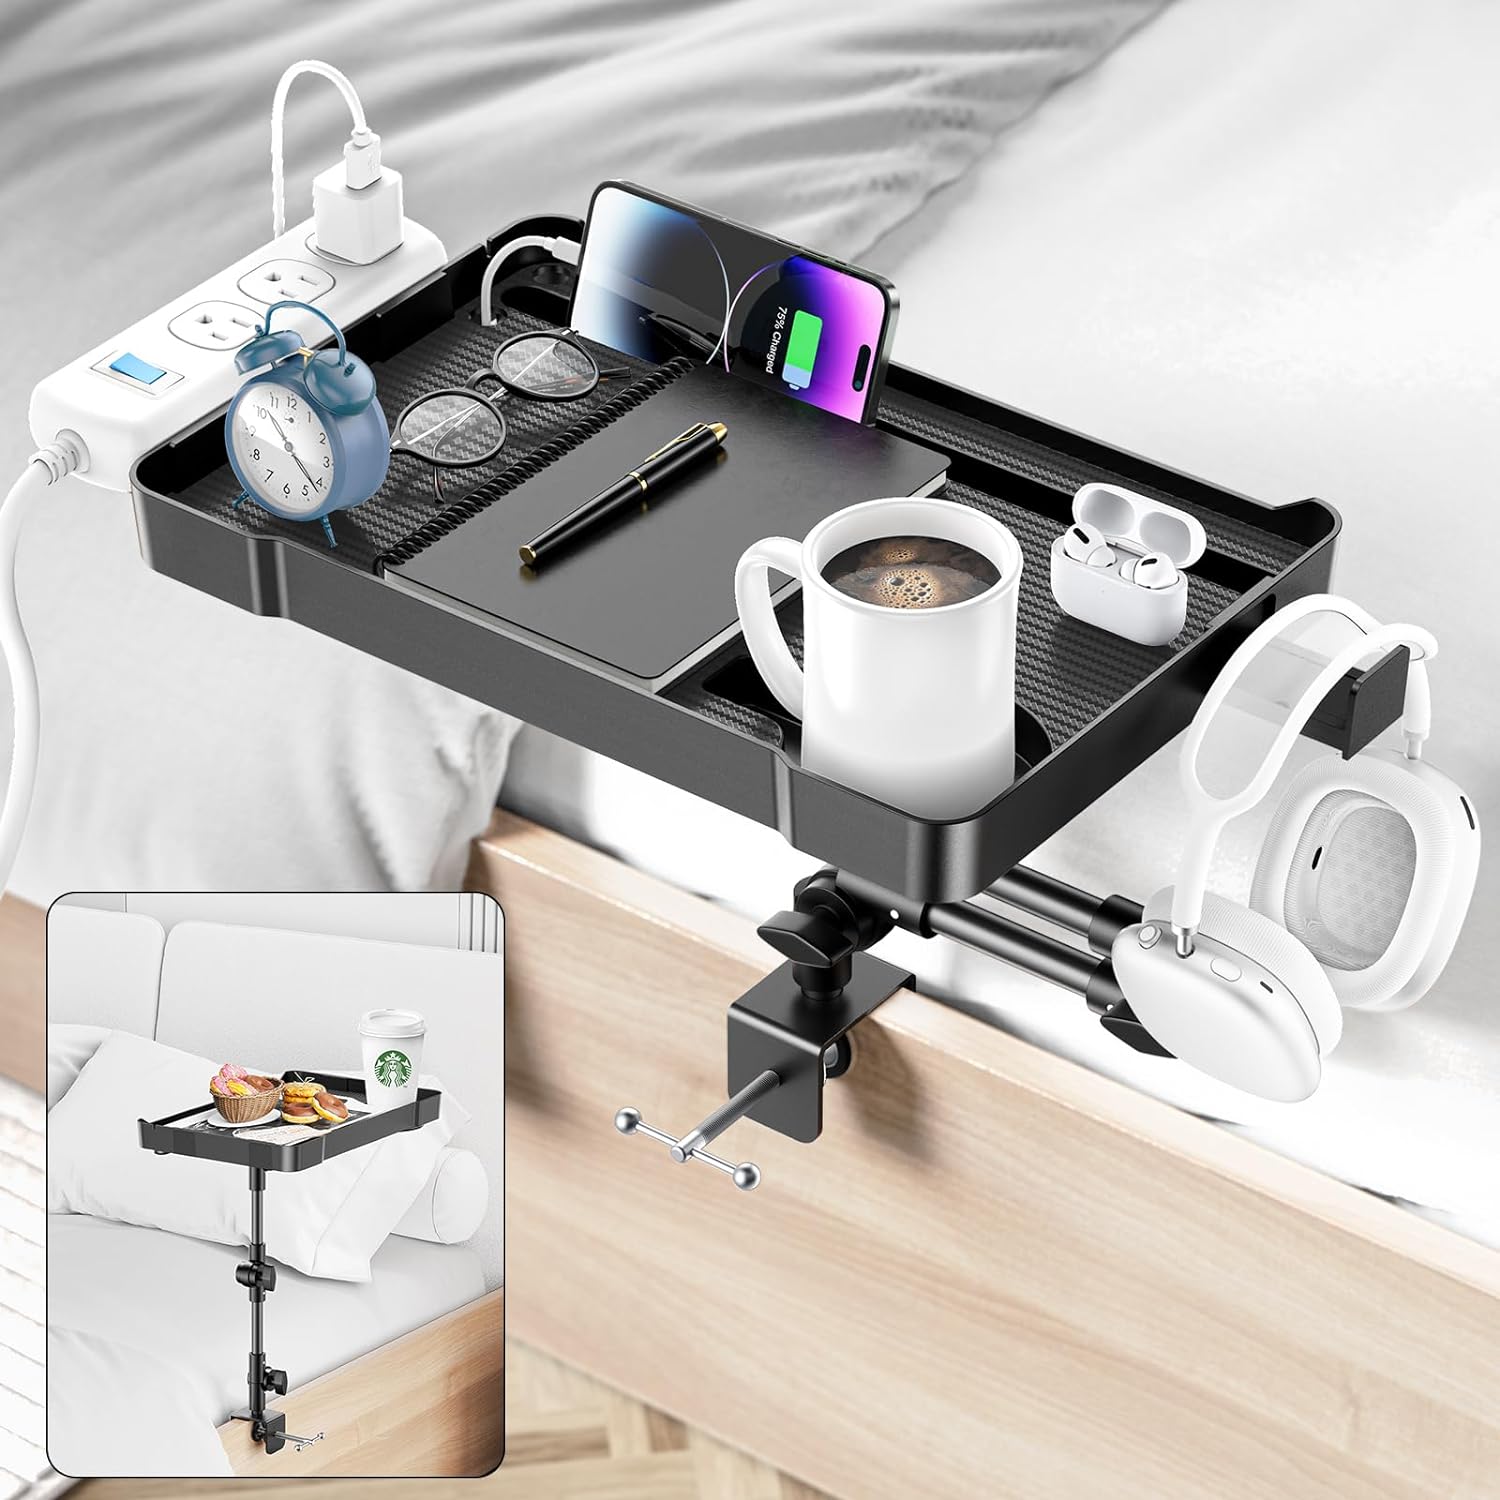 Bedside Shelf, Adjustable Height Bunk Bed Shelf Organizer Tray with Cup Holder